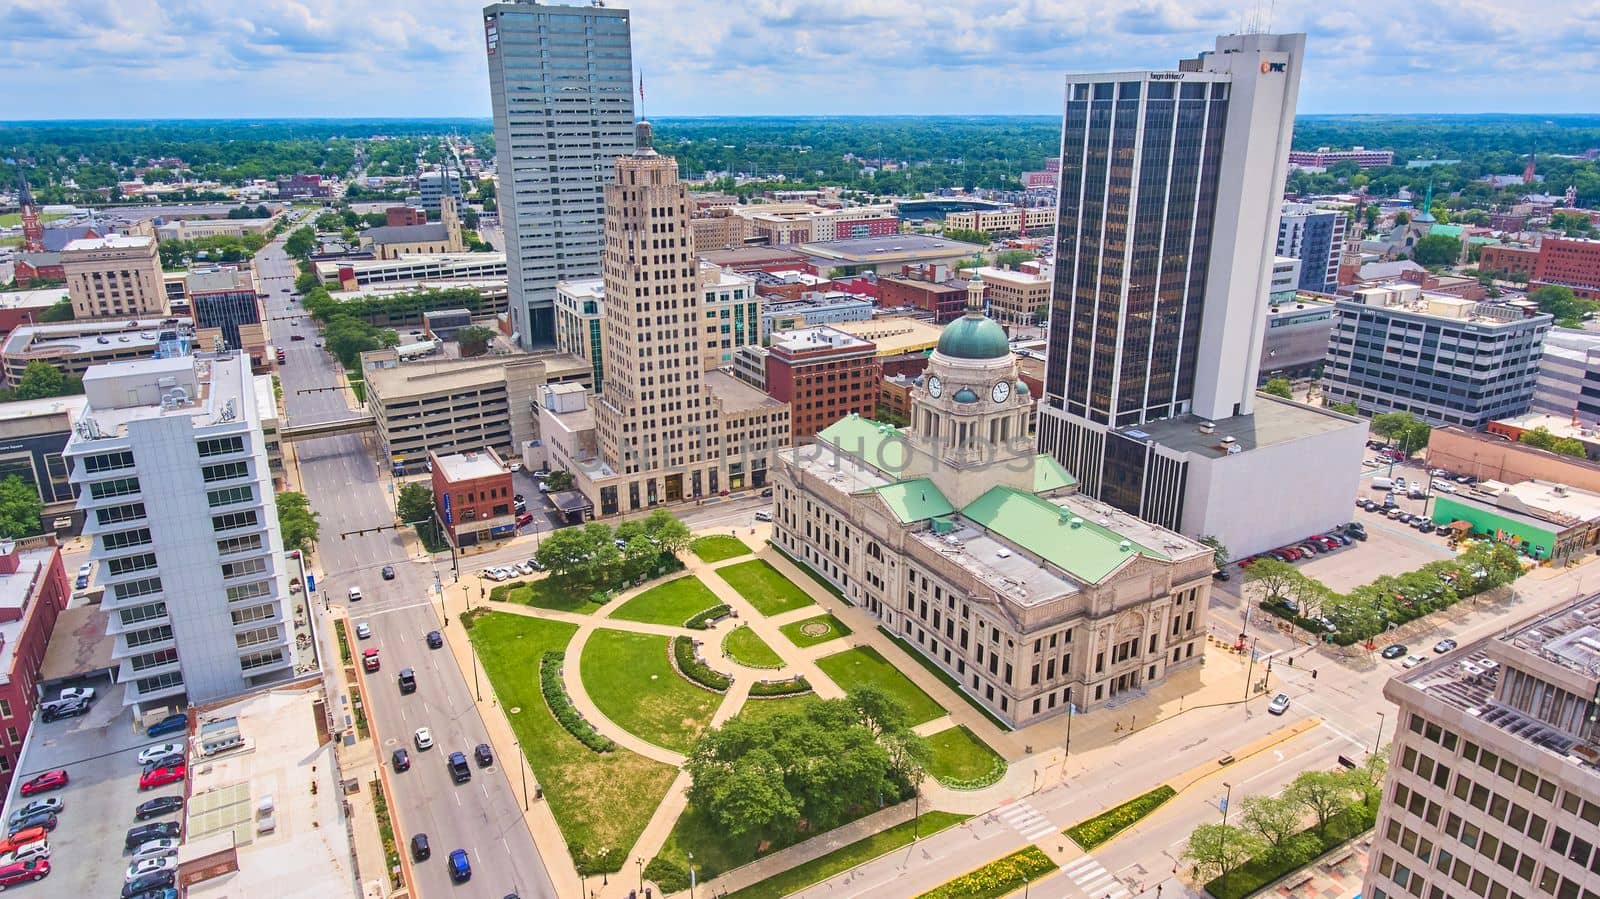 City surrounds stunning Allen County courthouse in Fort Wayne, Indiana by njproductions